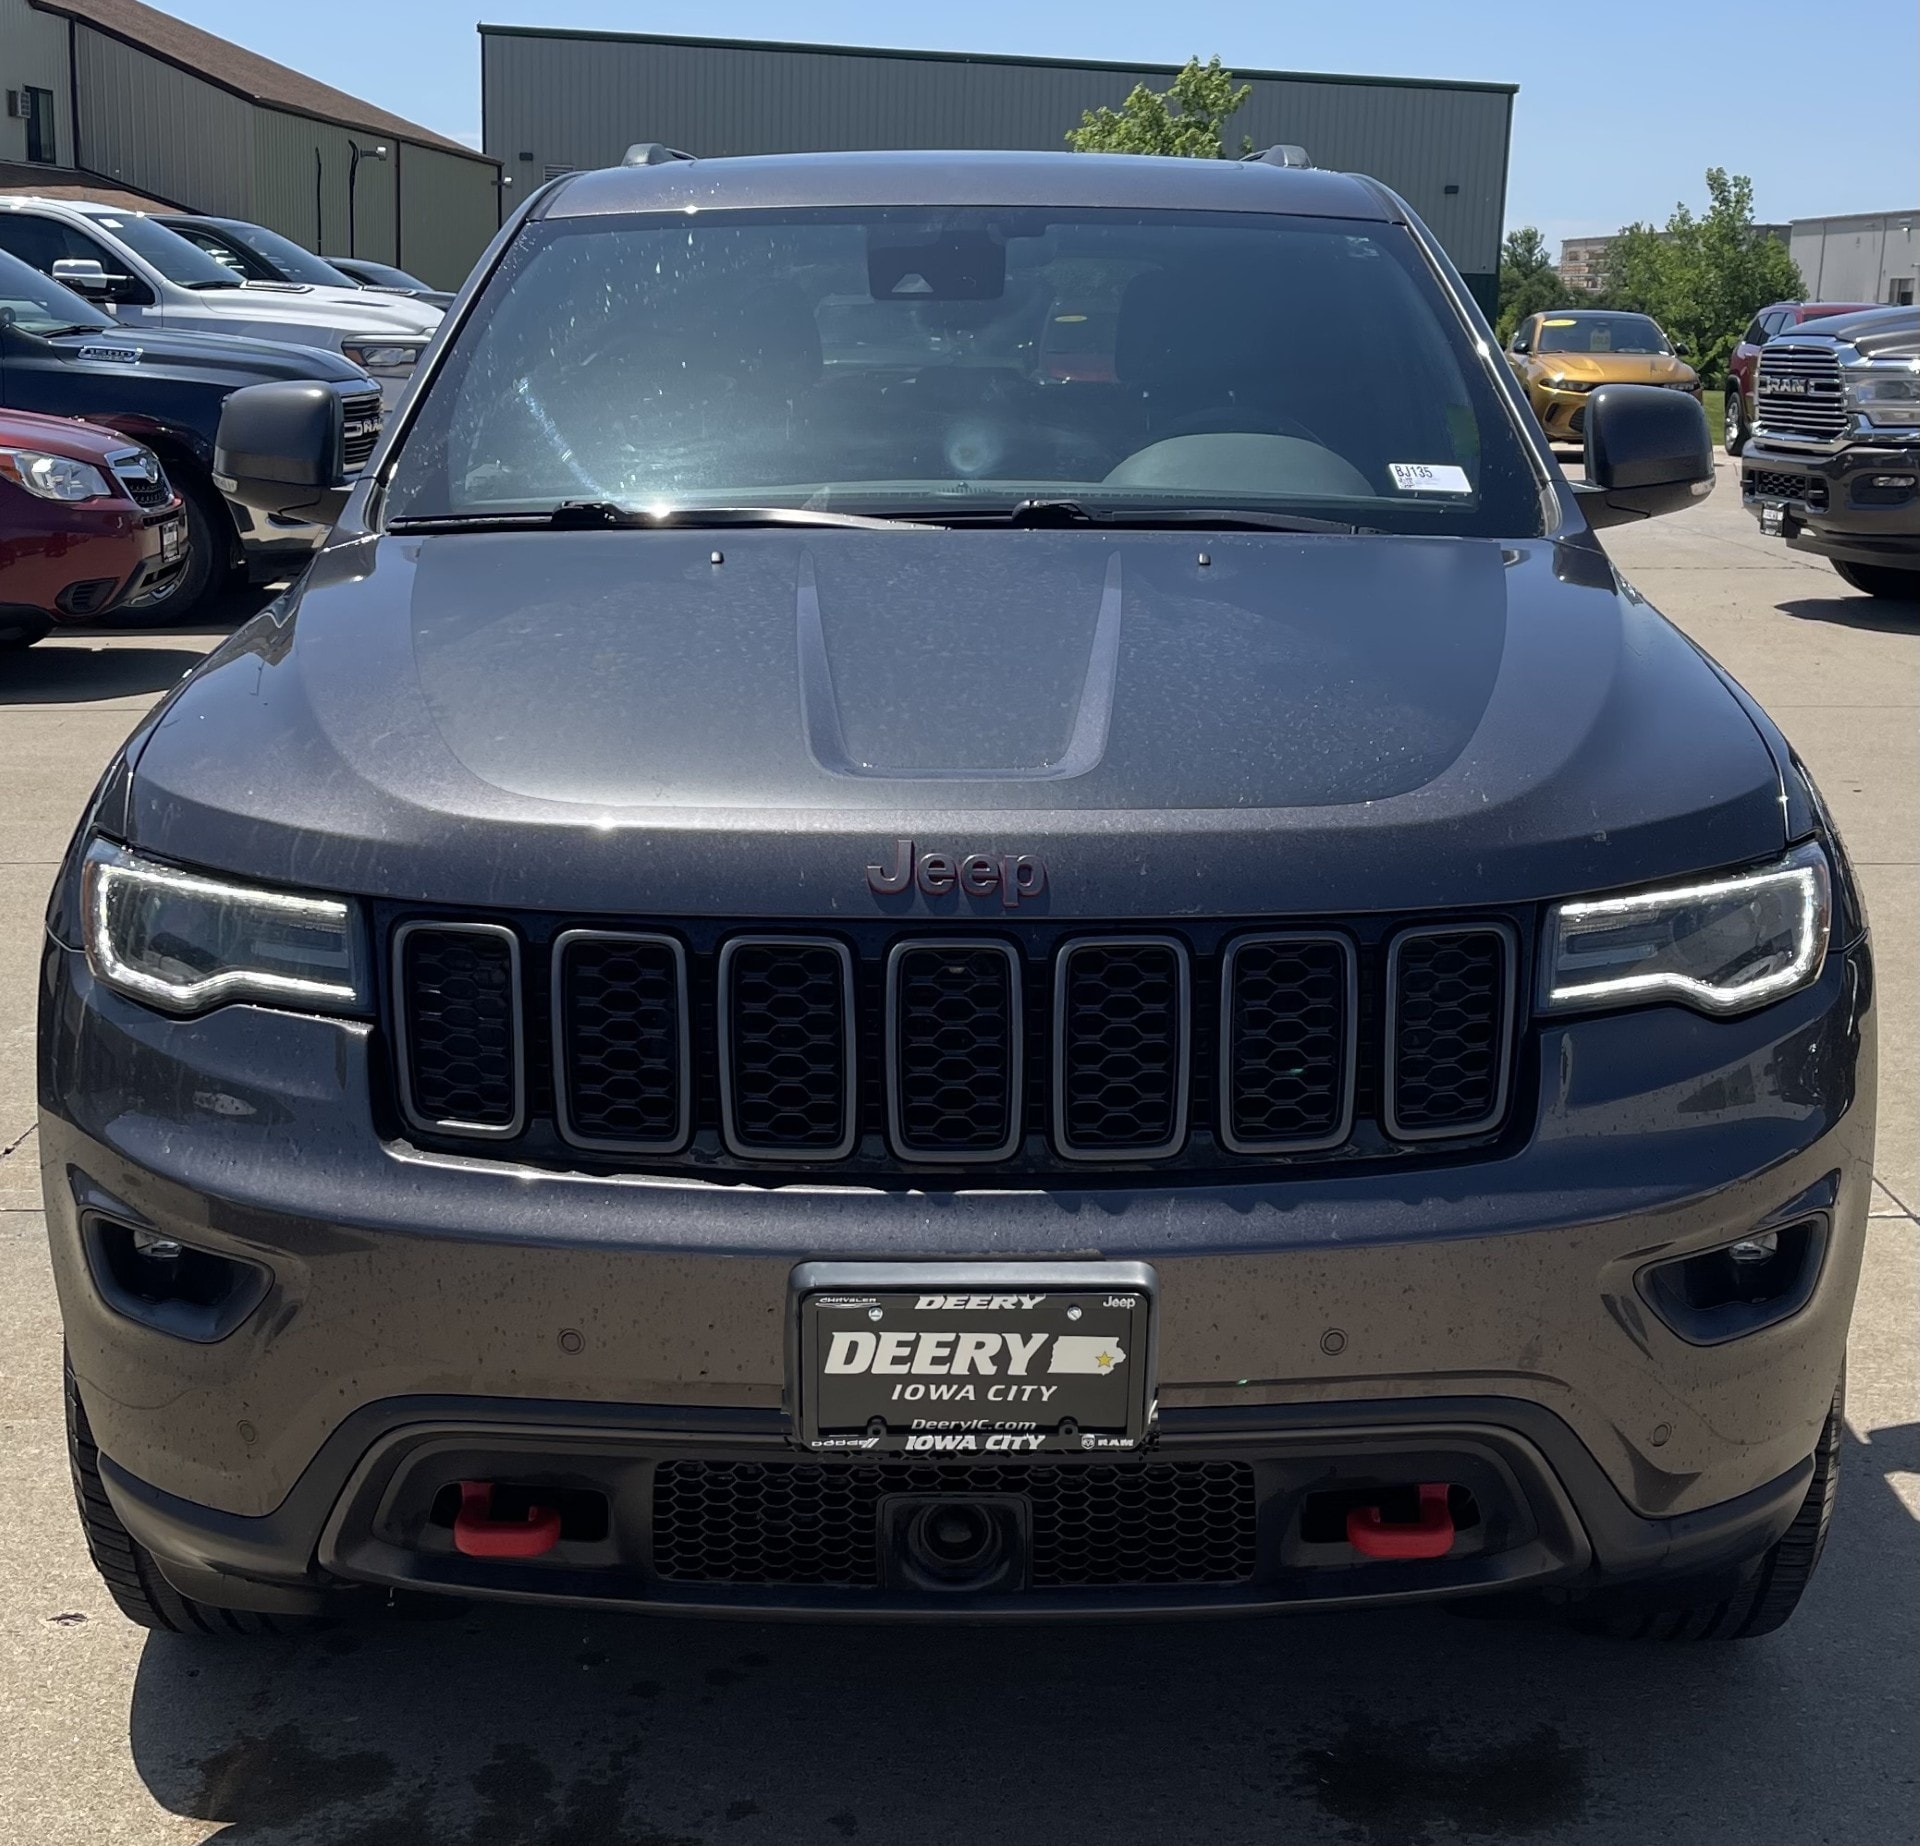 Certified 2018 Jeep Grand Cherokee Trailhawk with VIN 1C4RJFLT3JC342717 for sale in Iowa City, IA